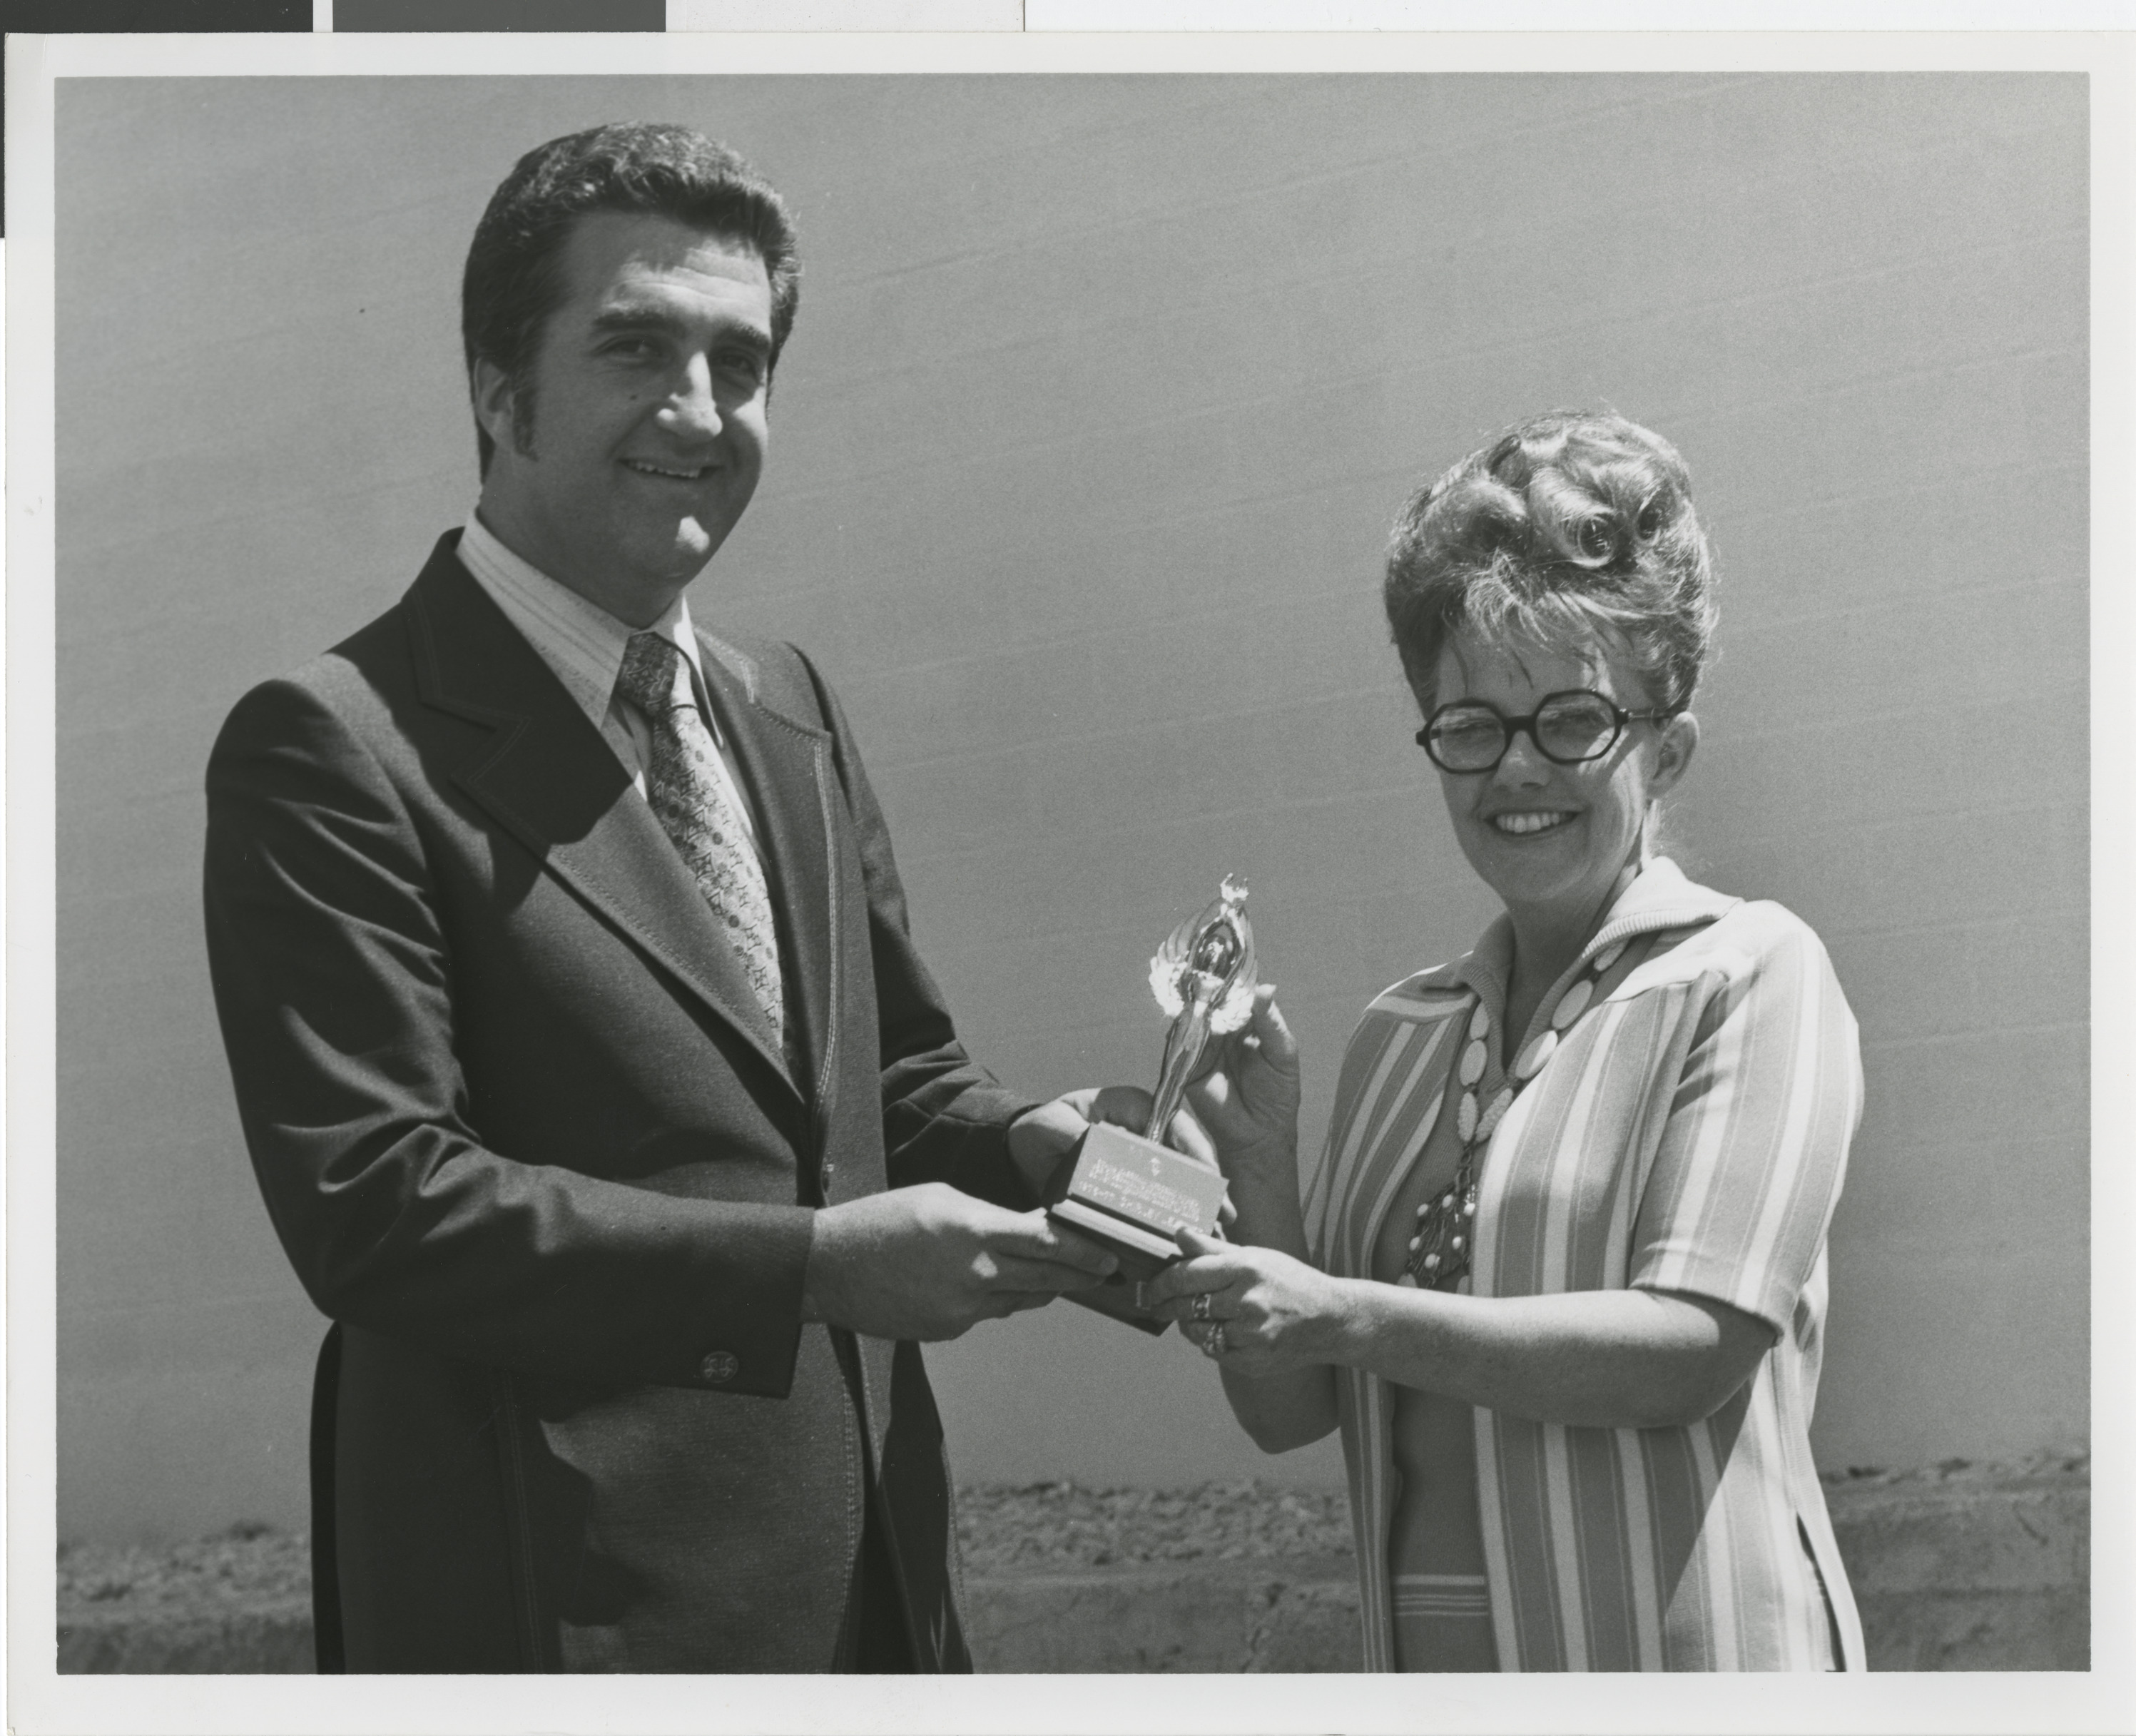 Photograph of Ron Lurie presenting a trophy